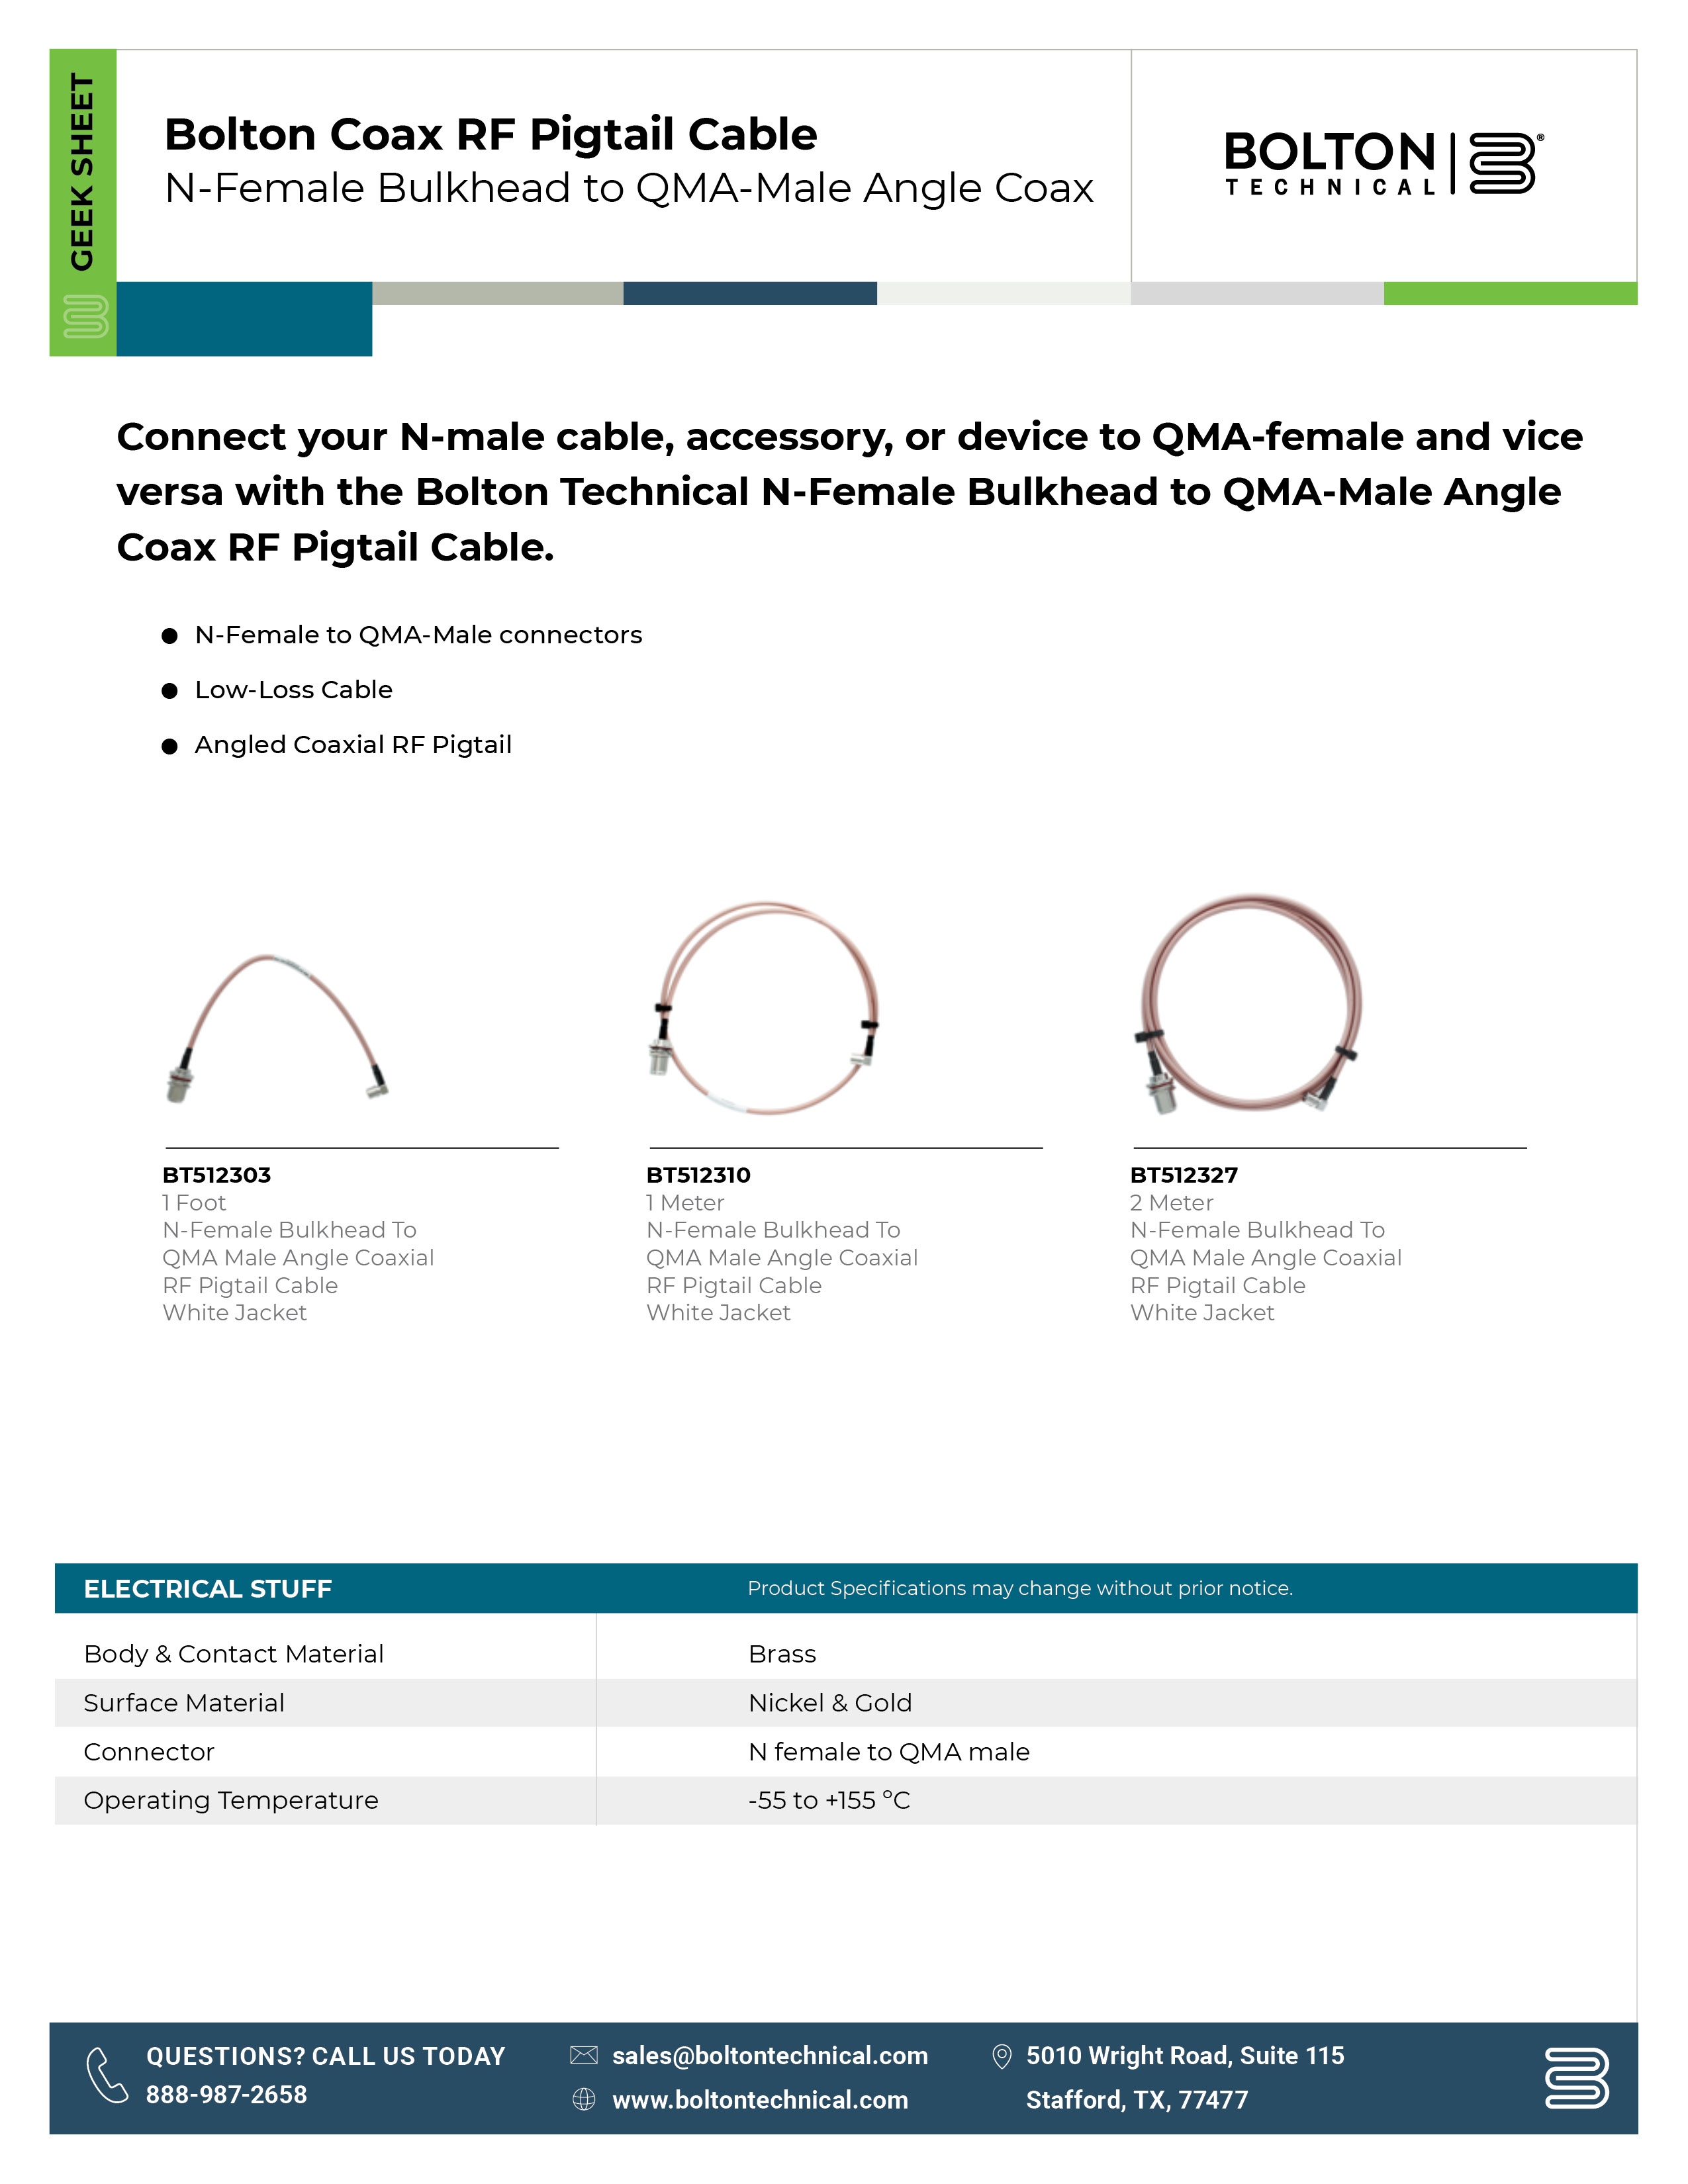 Bolton Pigtail Specifications